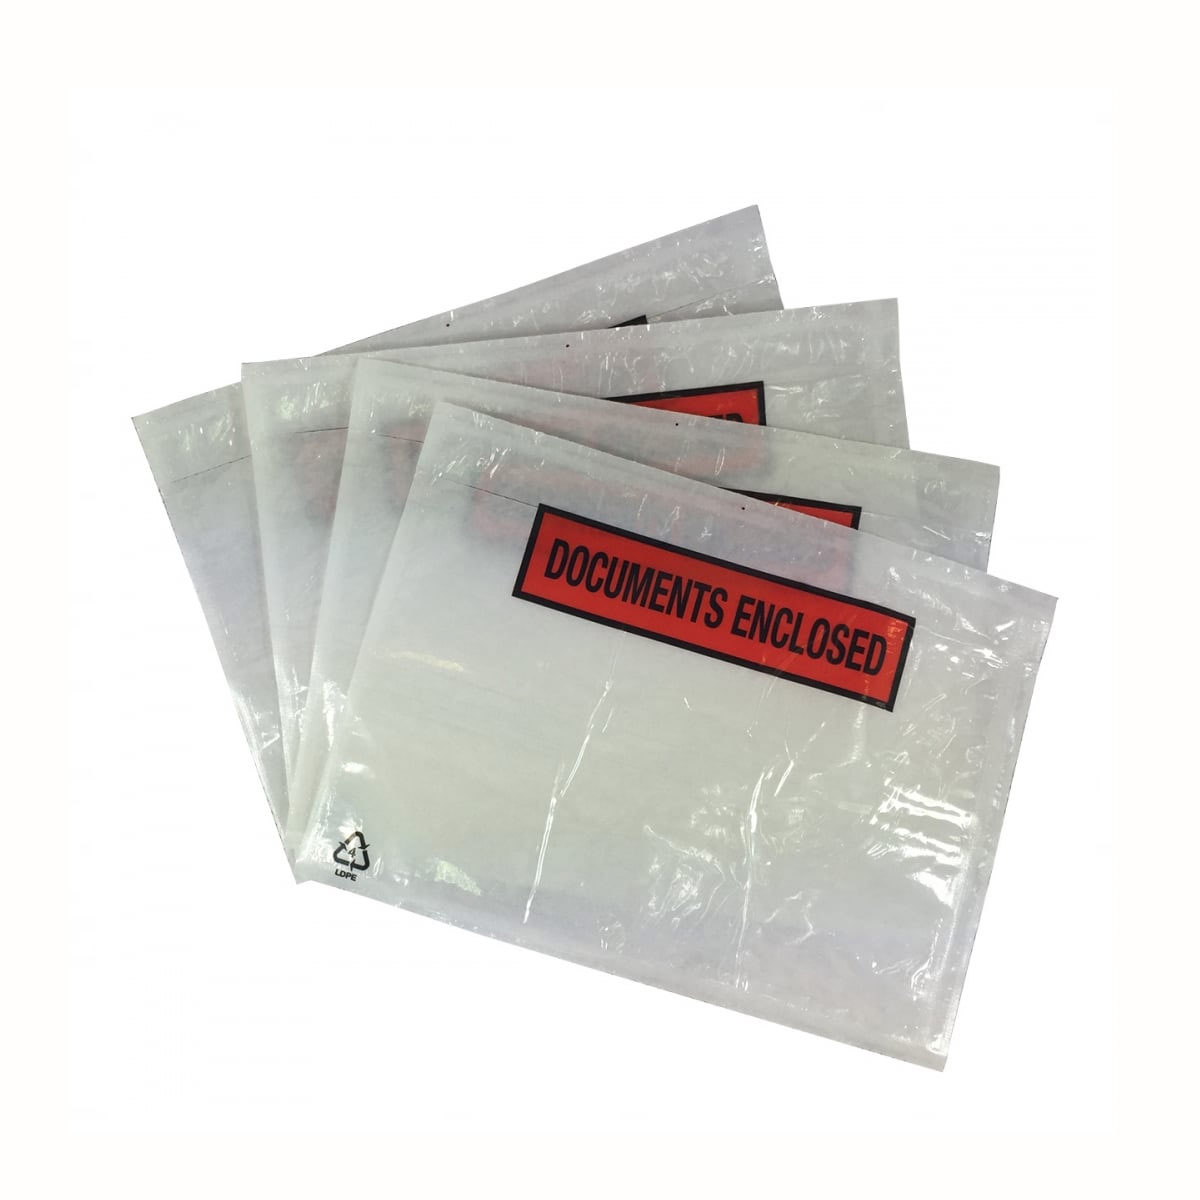 1000x A6 PRINTED Documents Enclosed Plastic Postage Bags Labels 